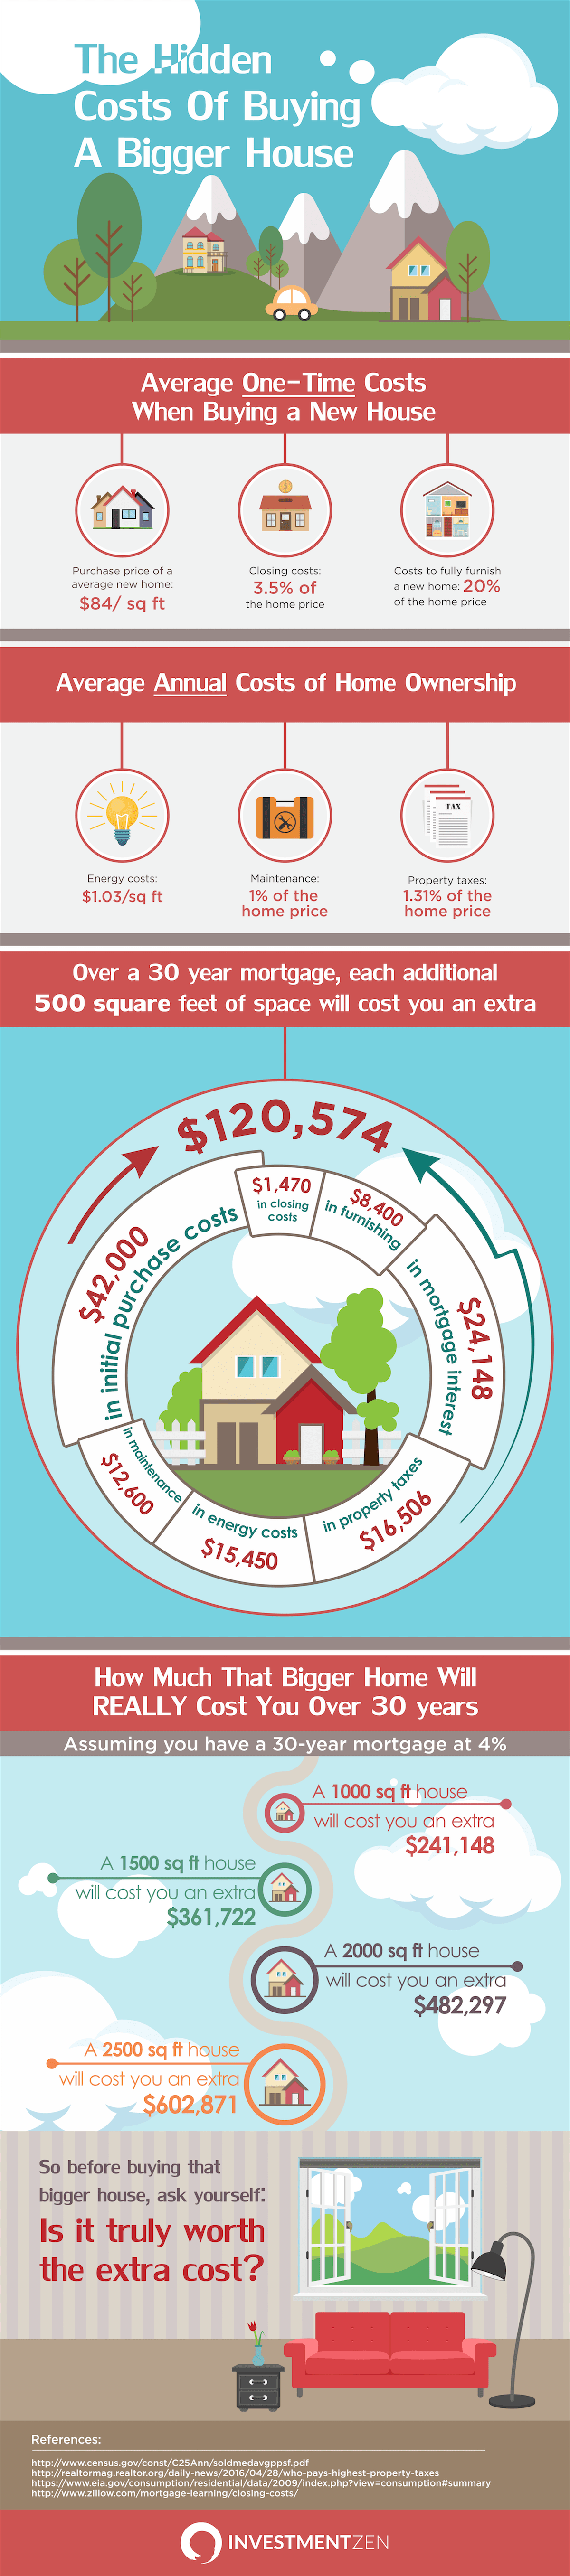 hidden costs of buying a bigger house infographic